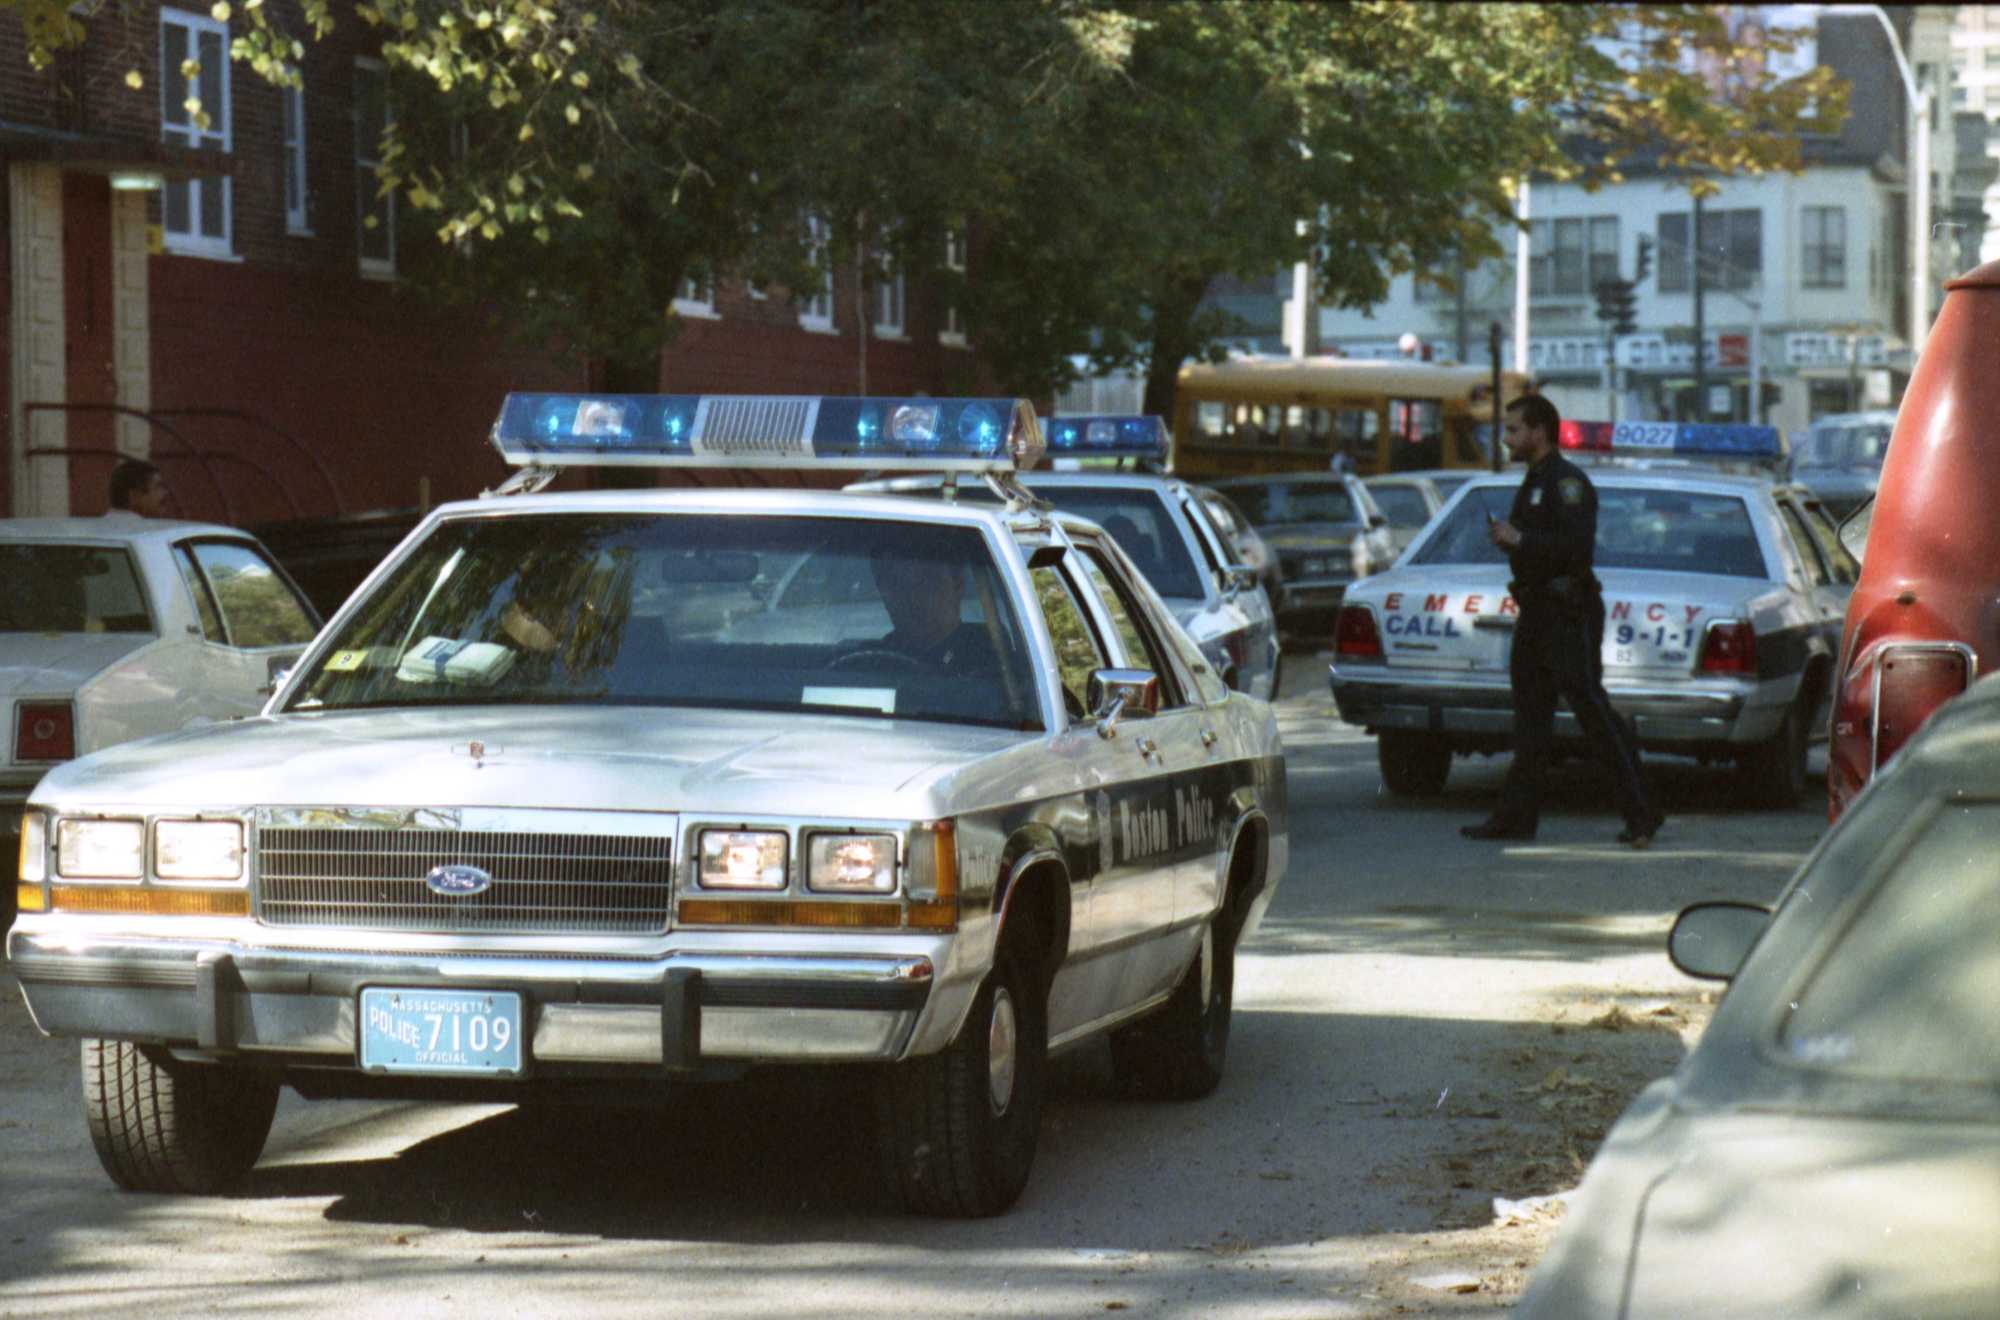 Police chased suspects on Horadan Way and Huban Court in Mission Hill on Oct. 25, 1989.